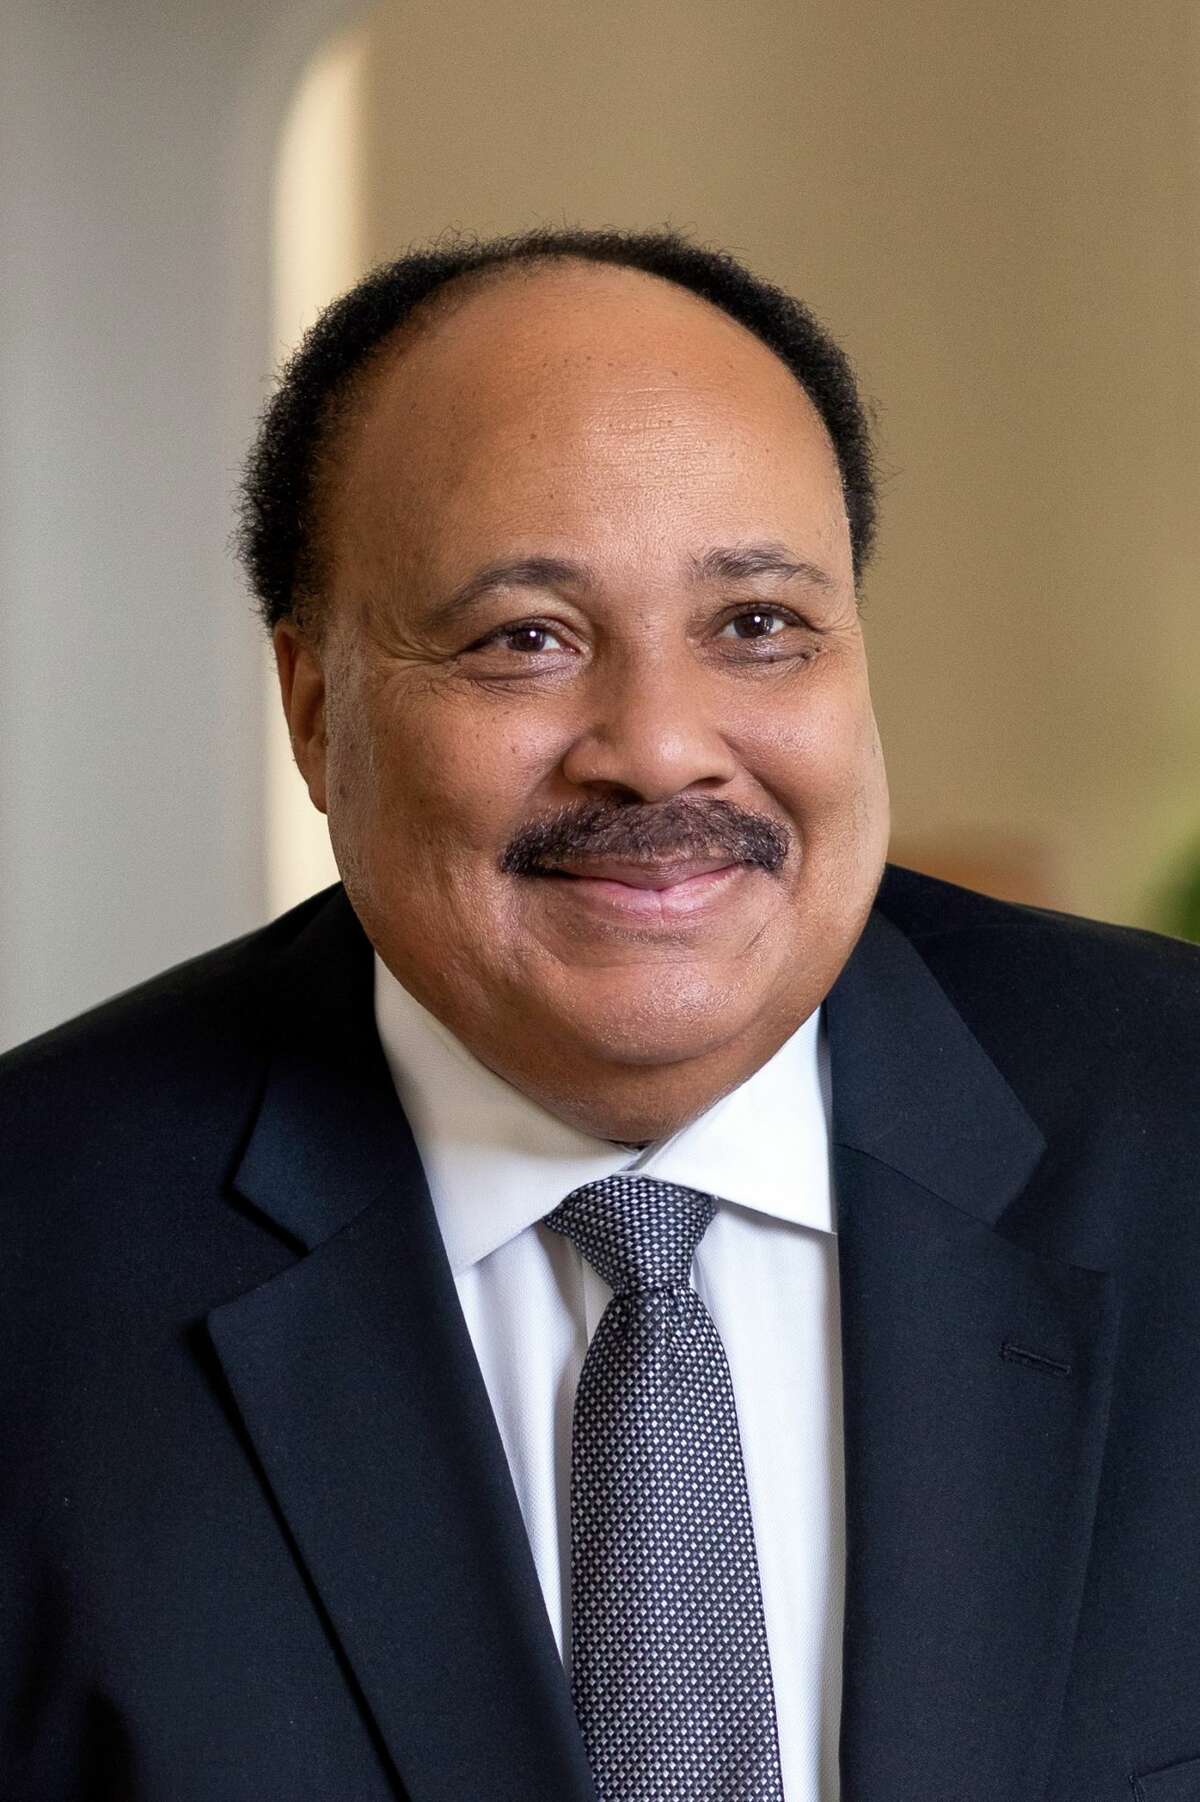 Martin Luther King III, will speak at Siena College on May 3, 2022, spoke to the Times Union recently about the state of the nation and the fight for racial justice.